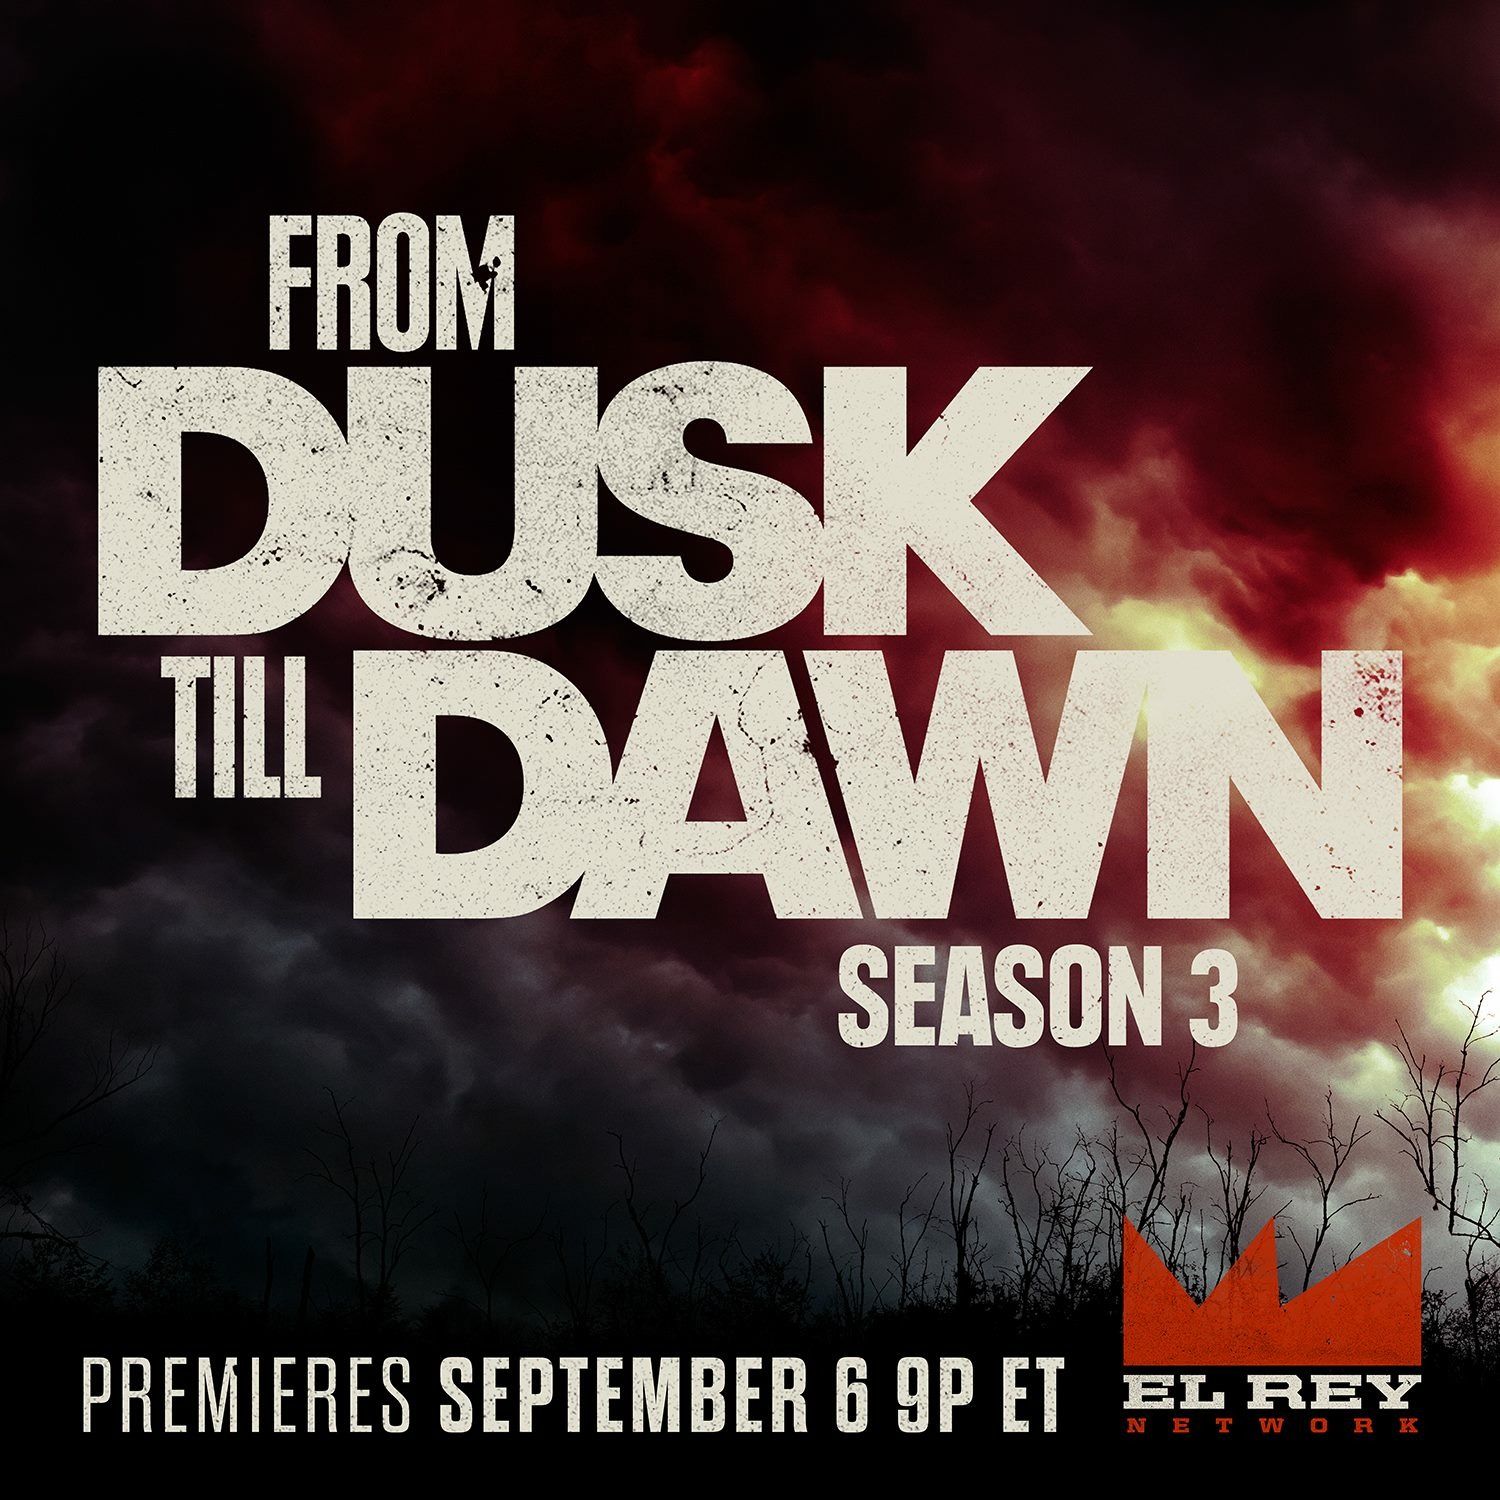 From Dusk Till Dawn season three premieres Sept. 6 at 9pm on